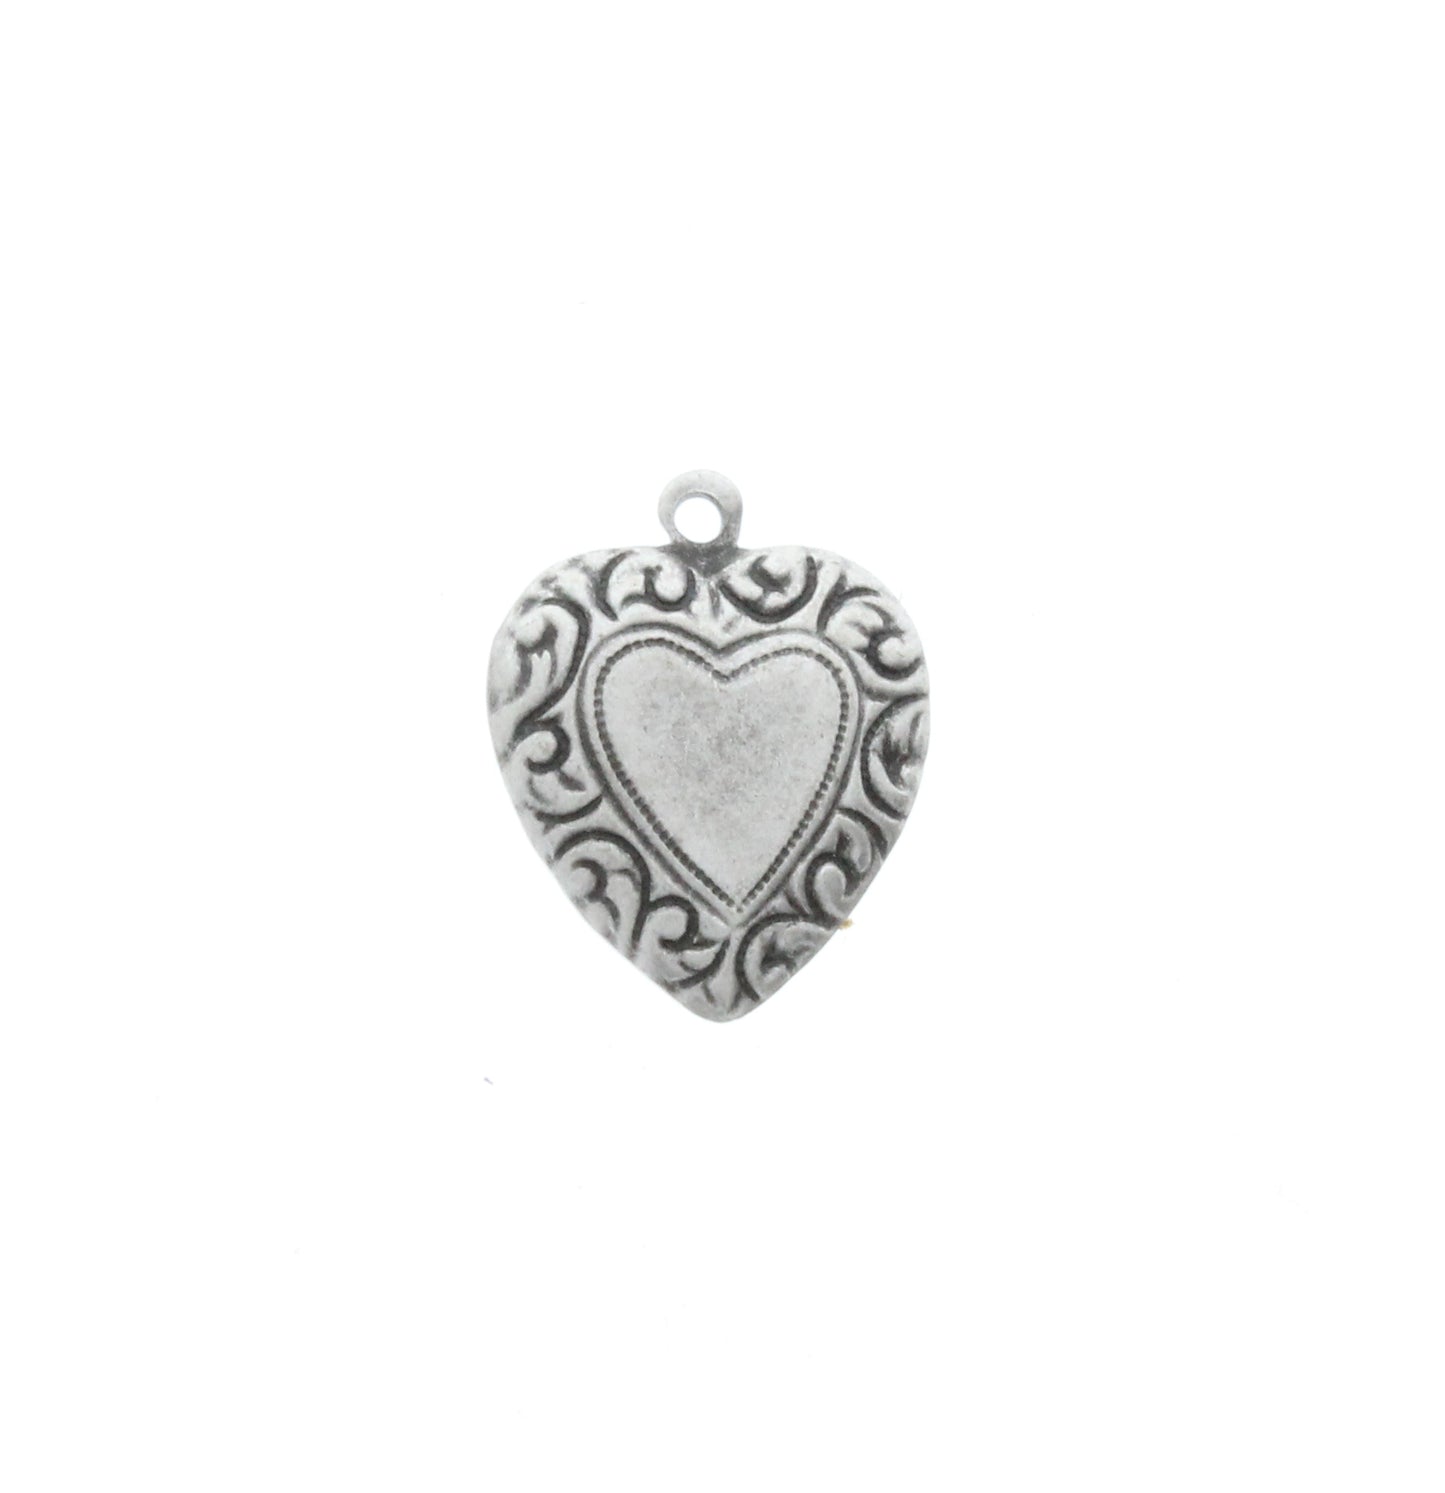 Vintage Silver Heart Charm, 6 pack